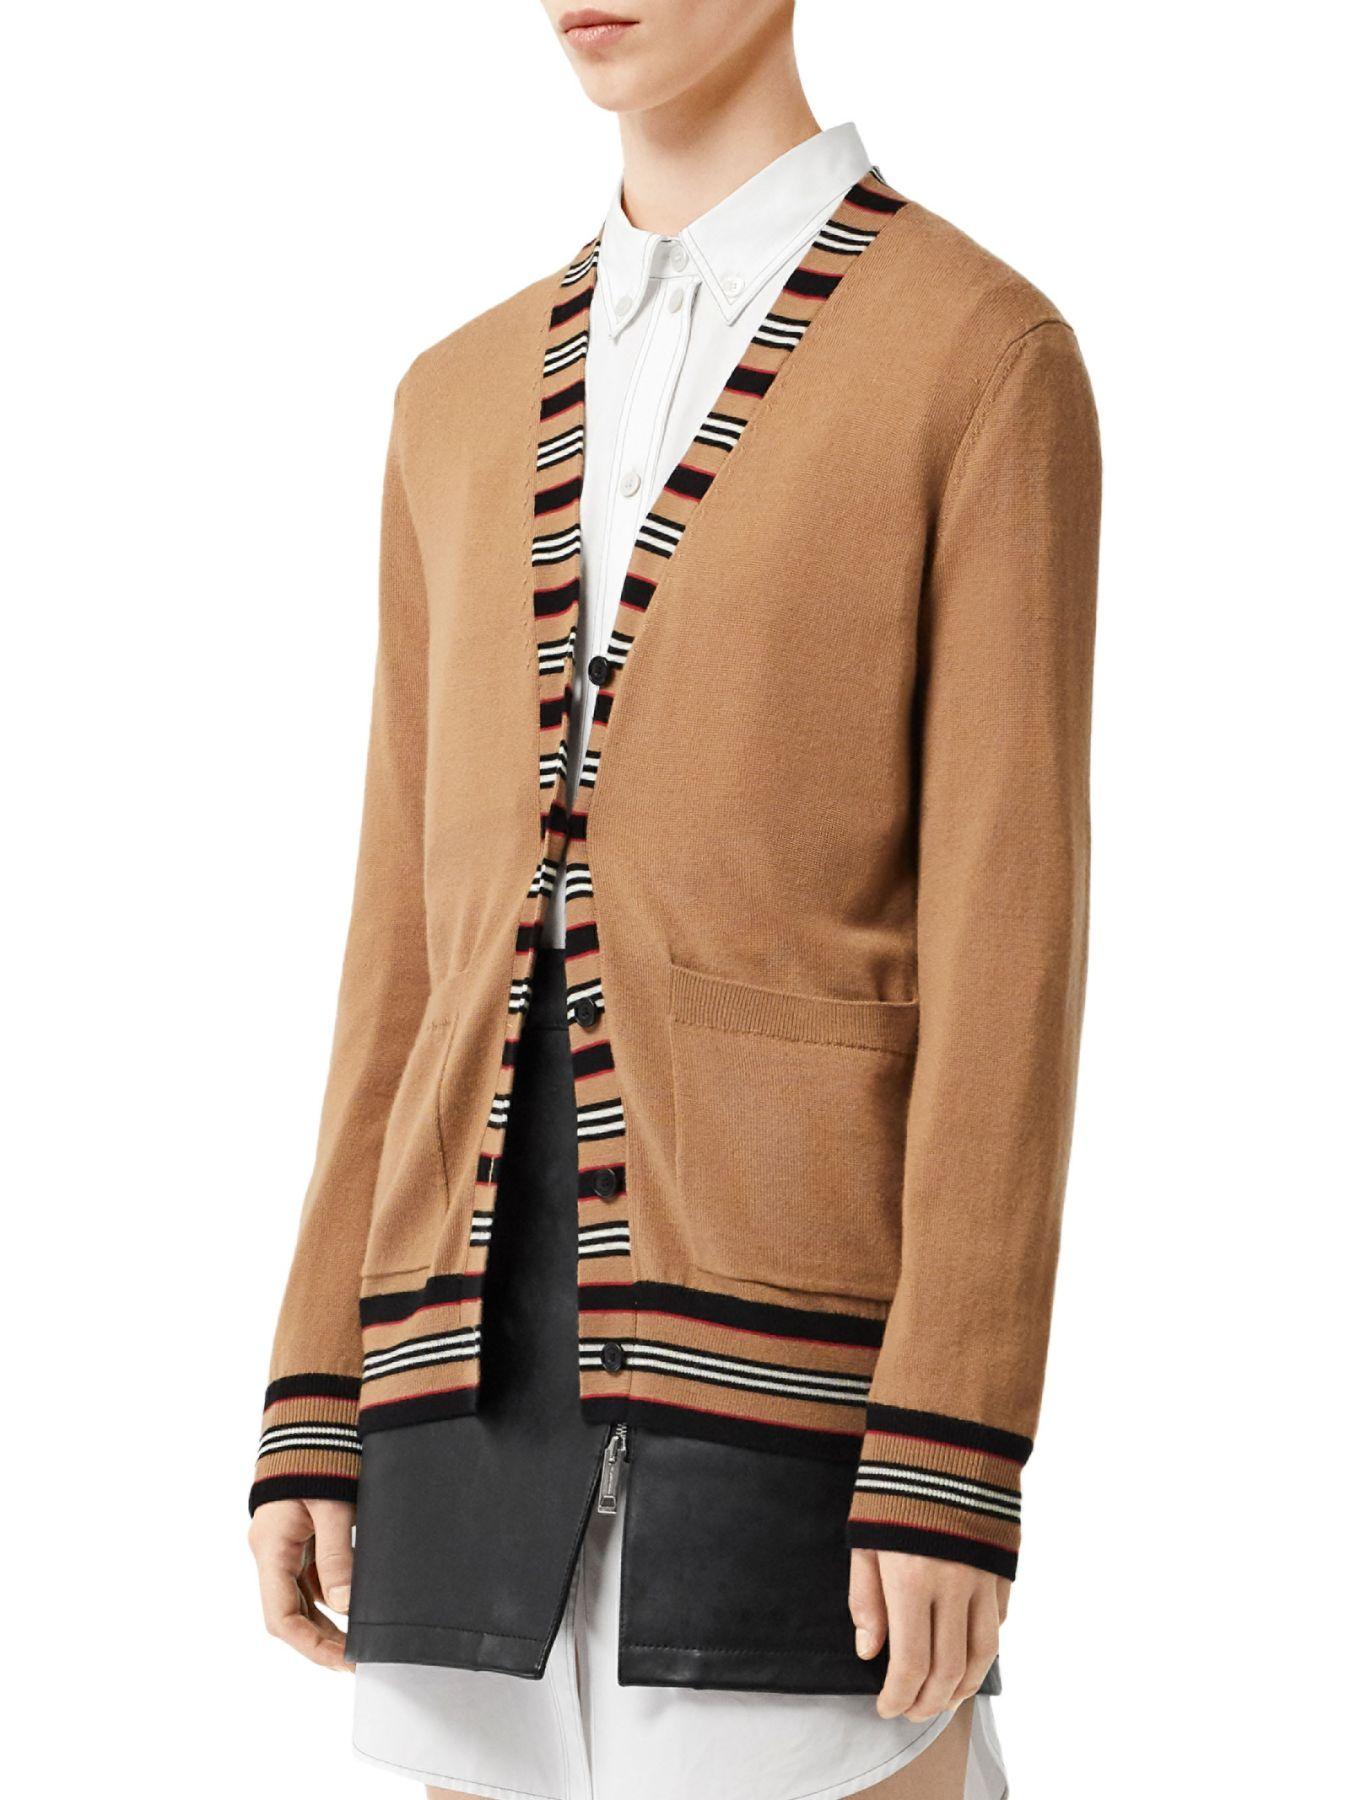 Burberry Icon Stripe Detail Merino Wool Cardigan in Camel (Natural) - Lyst